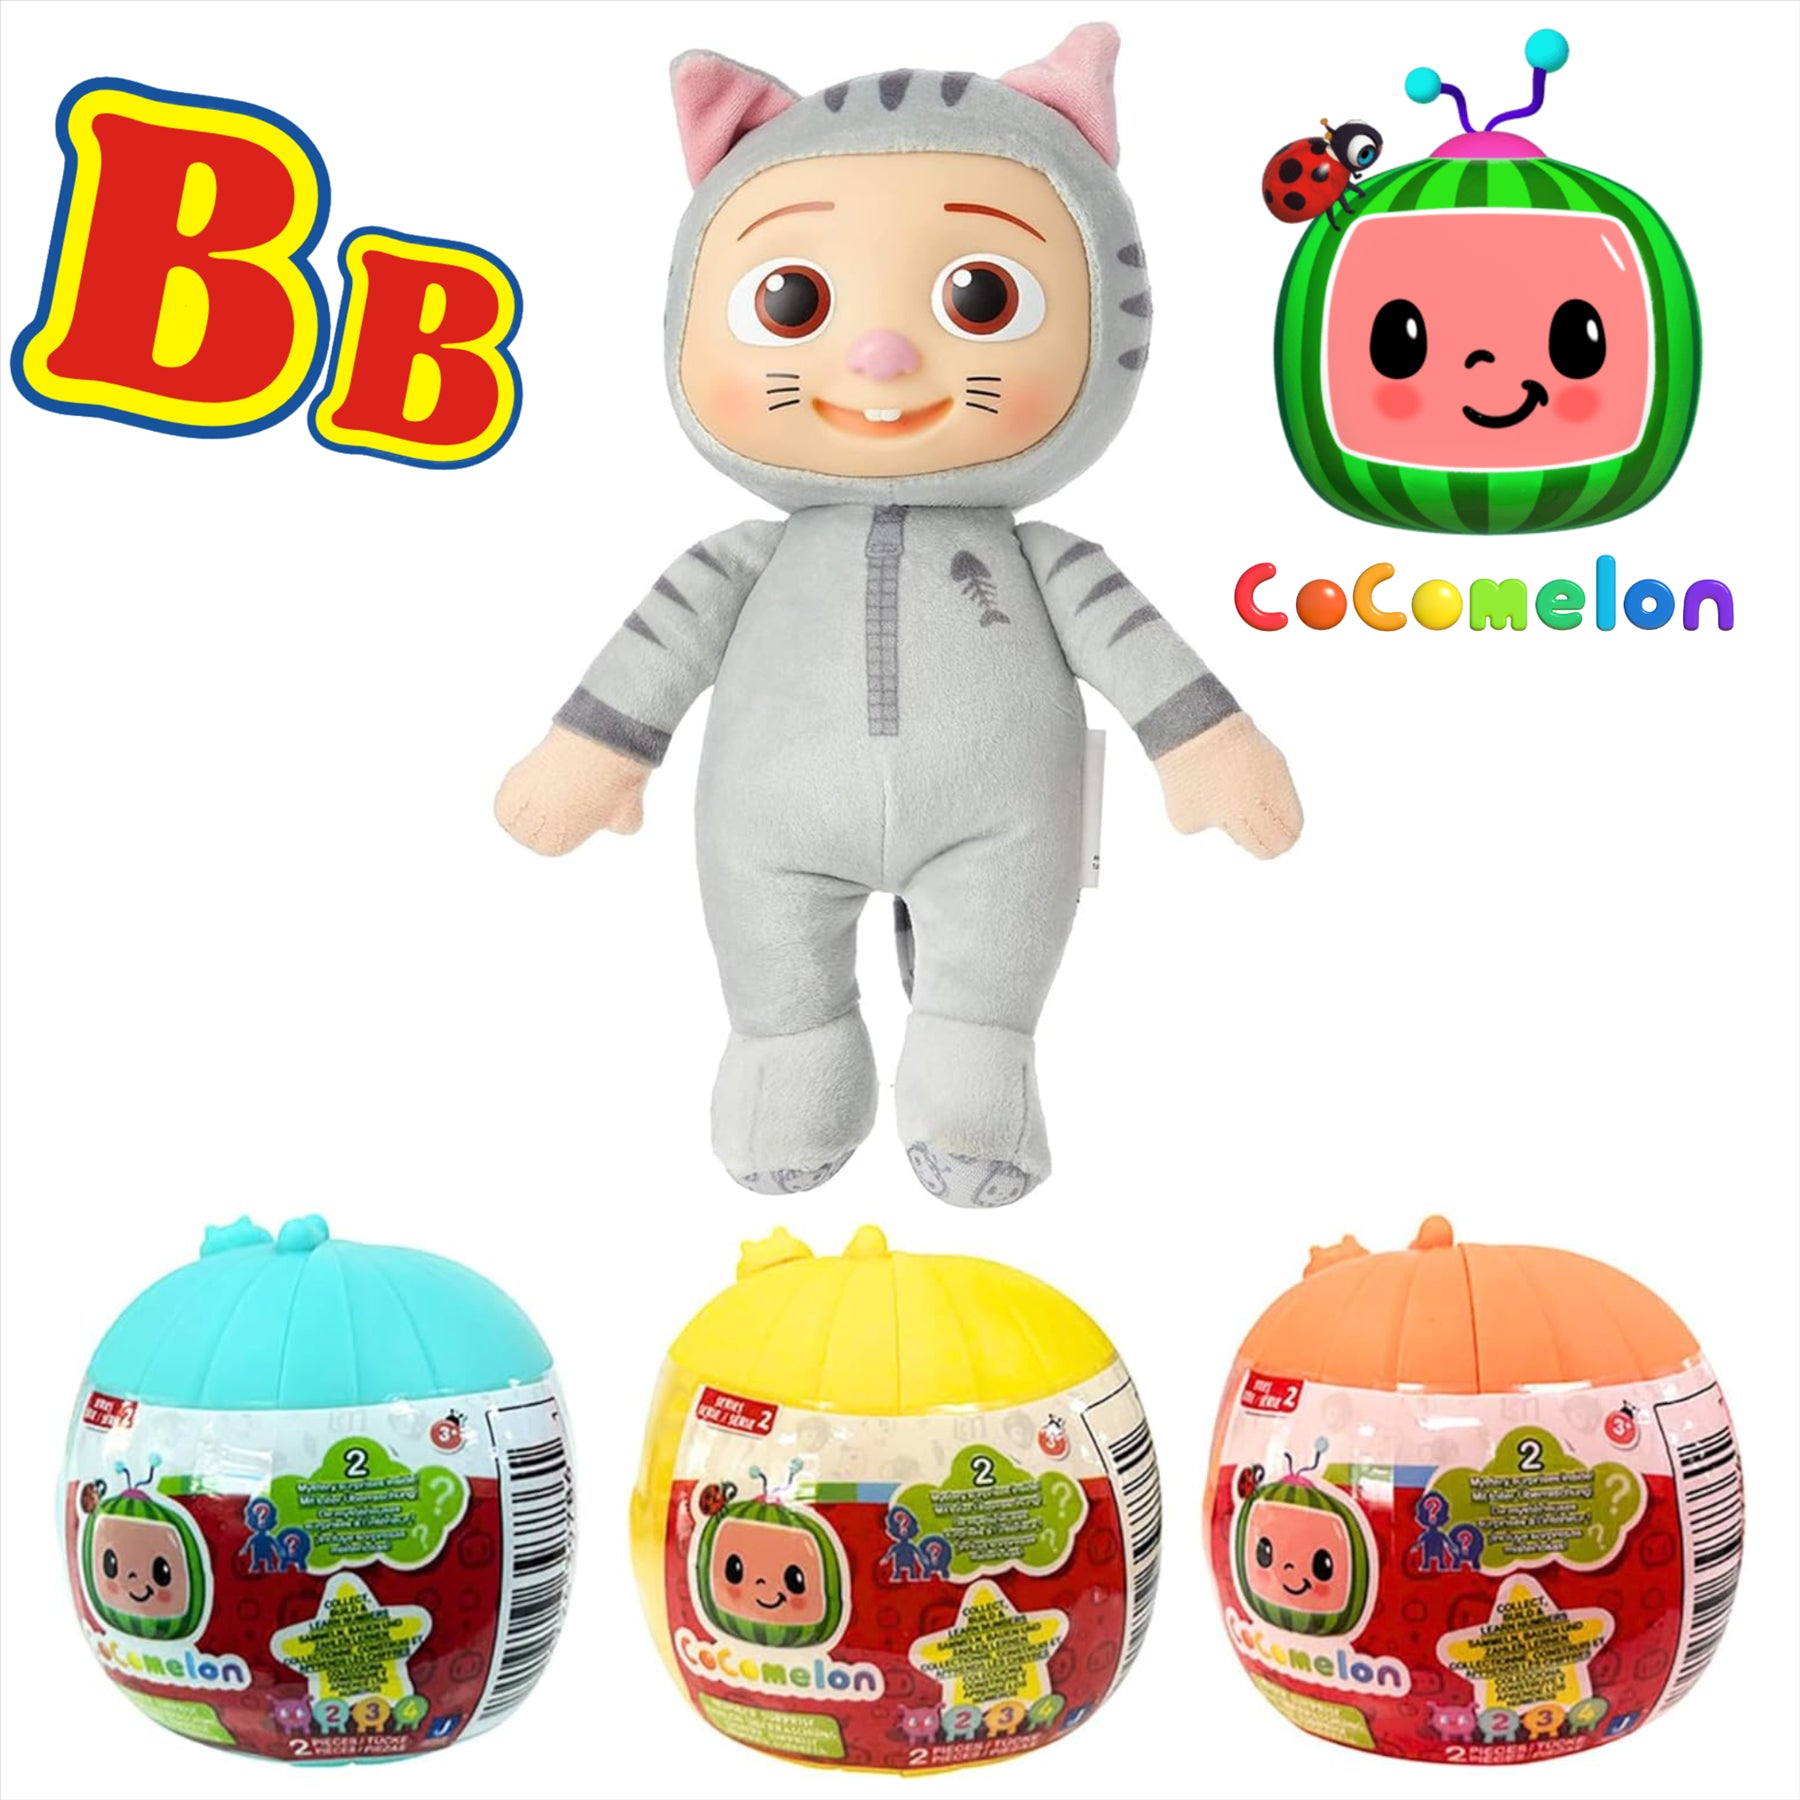 CoComelon Blind Capsule Number Character Articulated Figure Set - Kitty 20cm Plush and 3x Balls